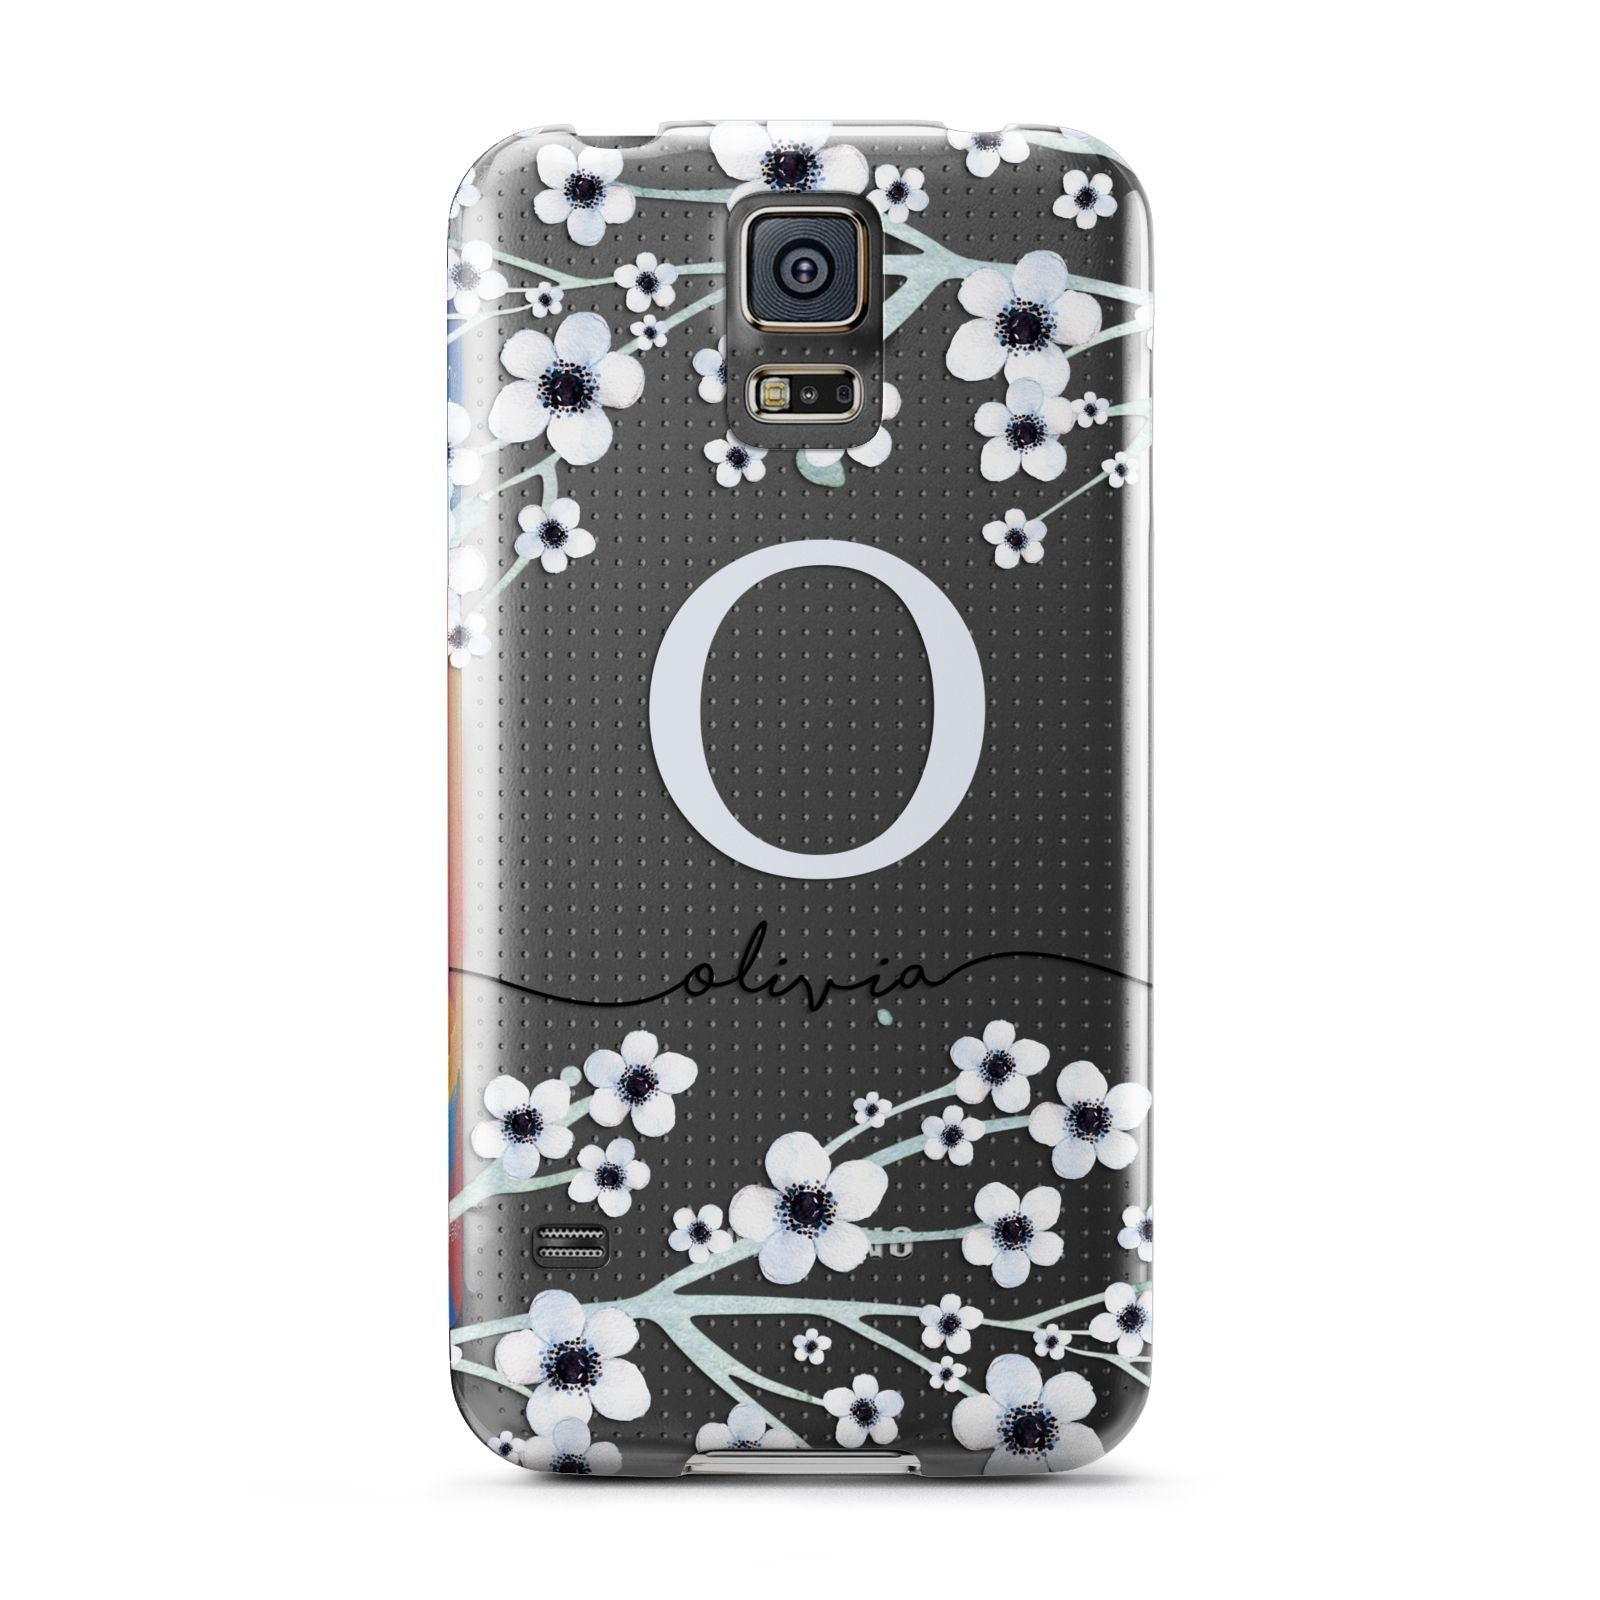 Personalised White Flower Samsung Galaxy S5 Case